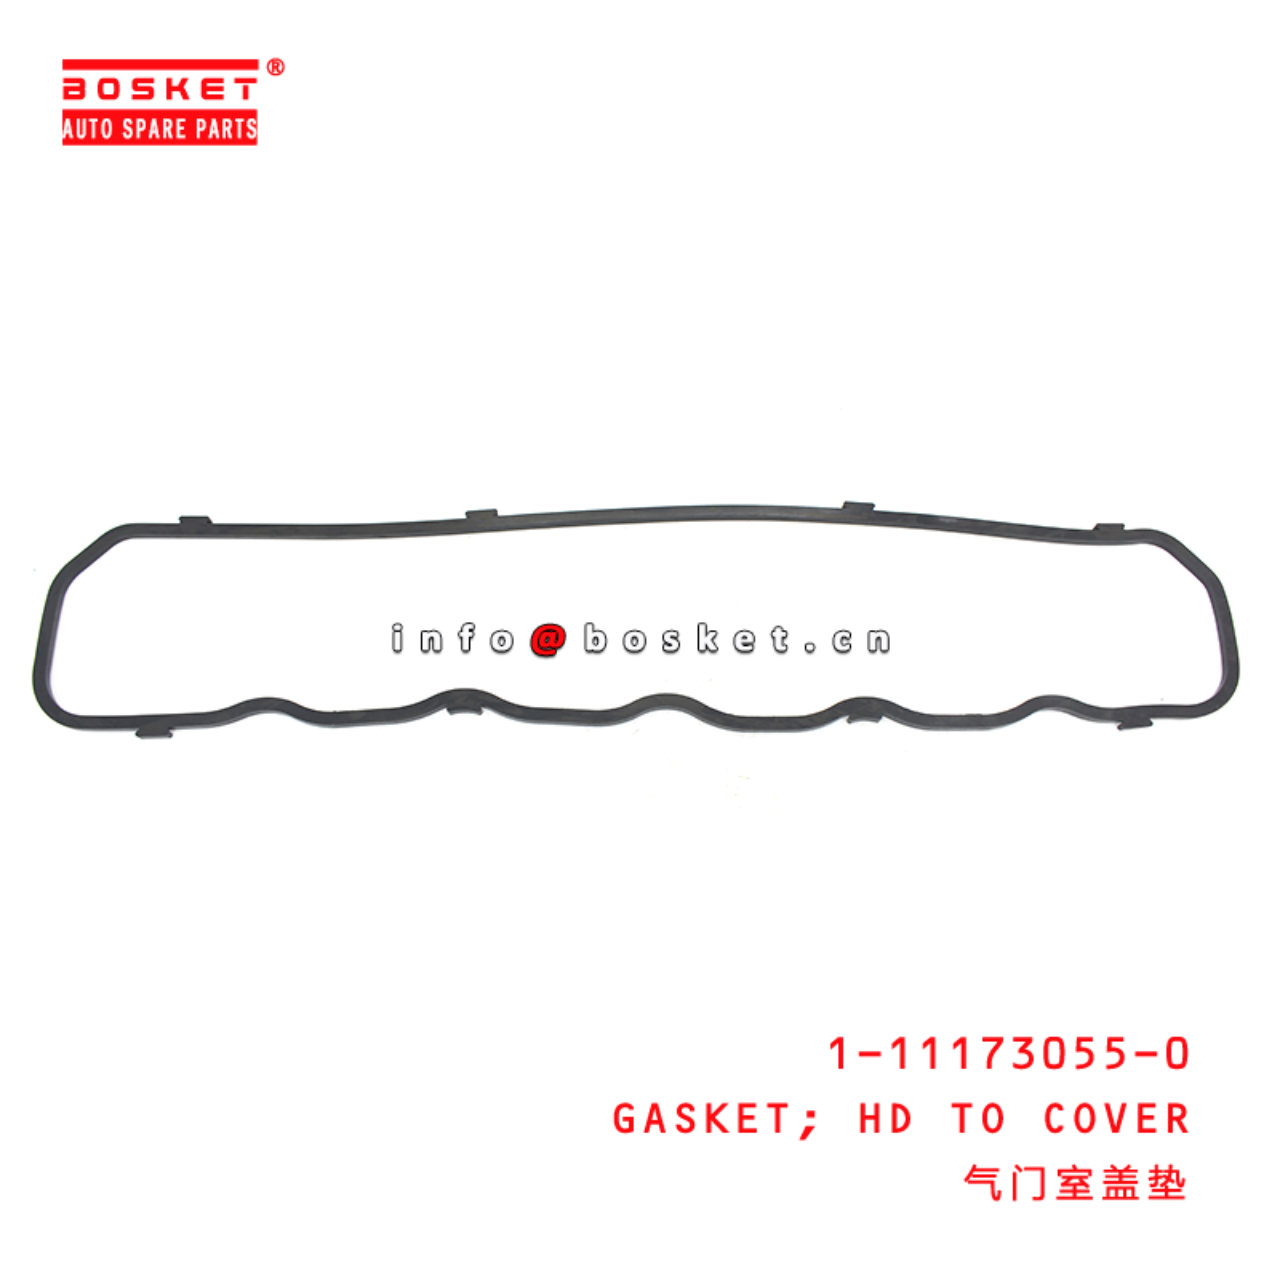 1-11173055-0 Head To Cover Gasket suitable for ISUZU 1111730550